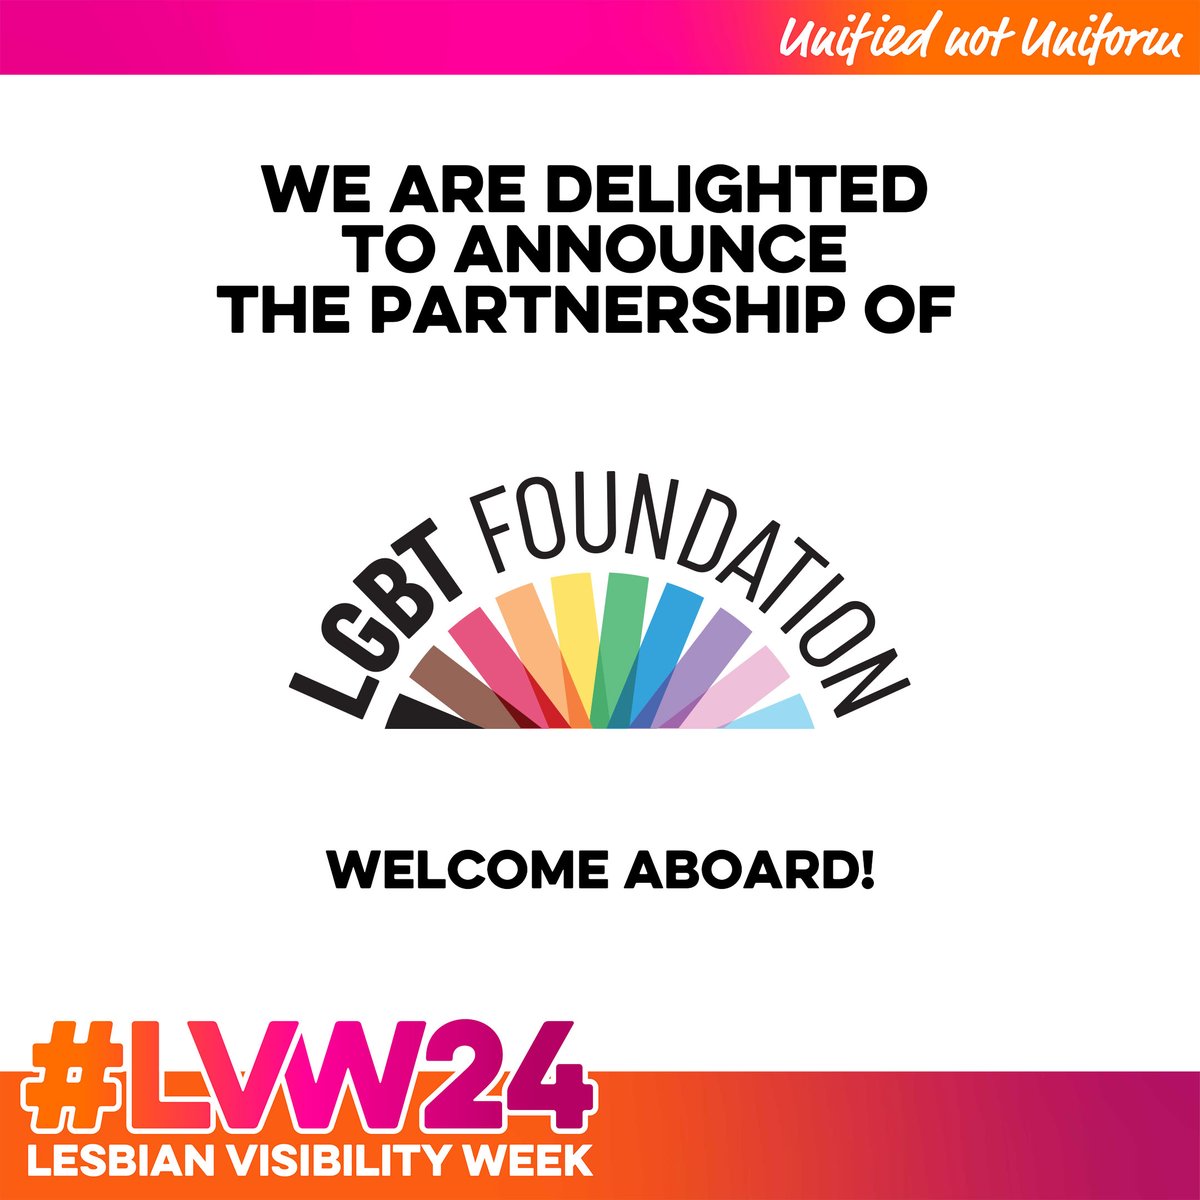 We are delighted to announce that @LGBTfdn is one of our #LVW24 charity partners 🌈 Learn more about Lesbian Visibility Week 2024: lesbianvisibilityweek.com